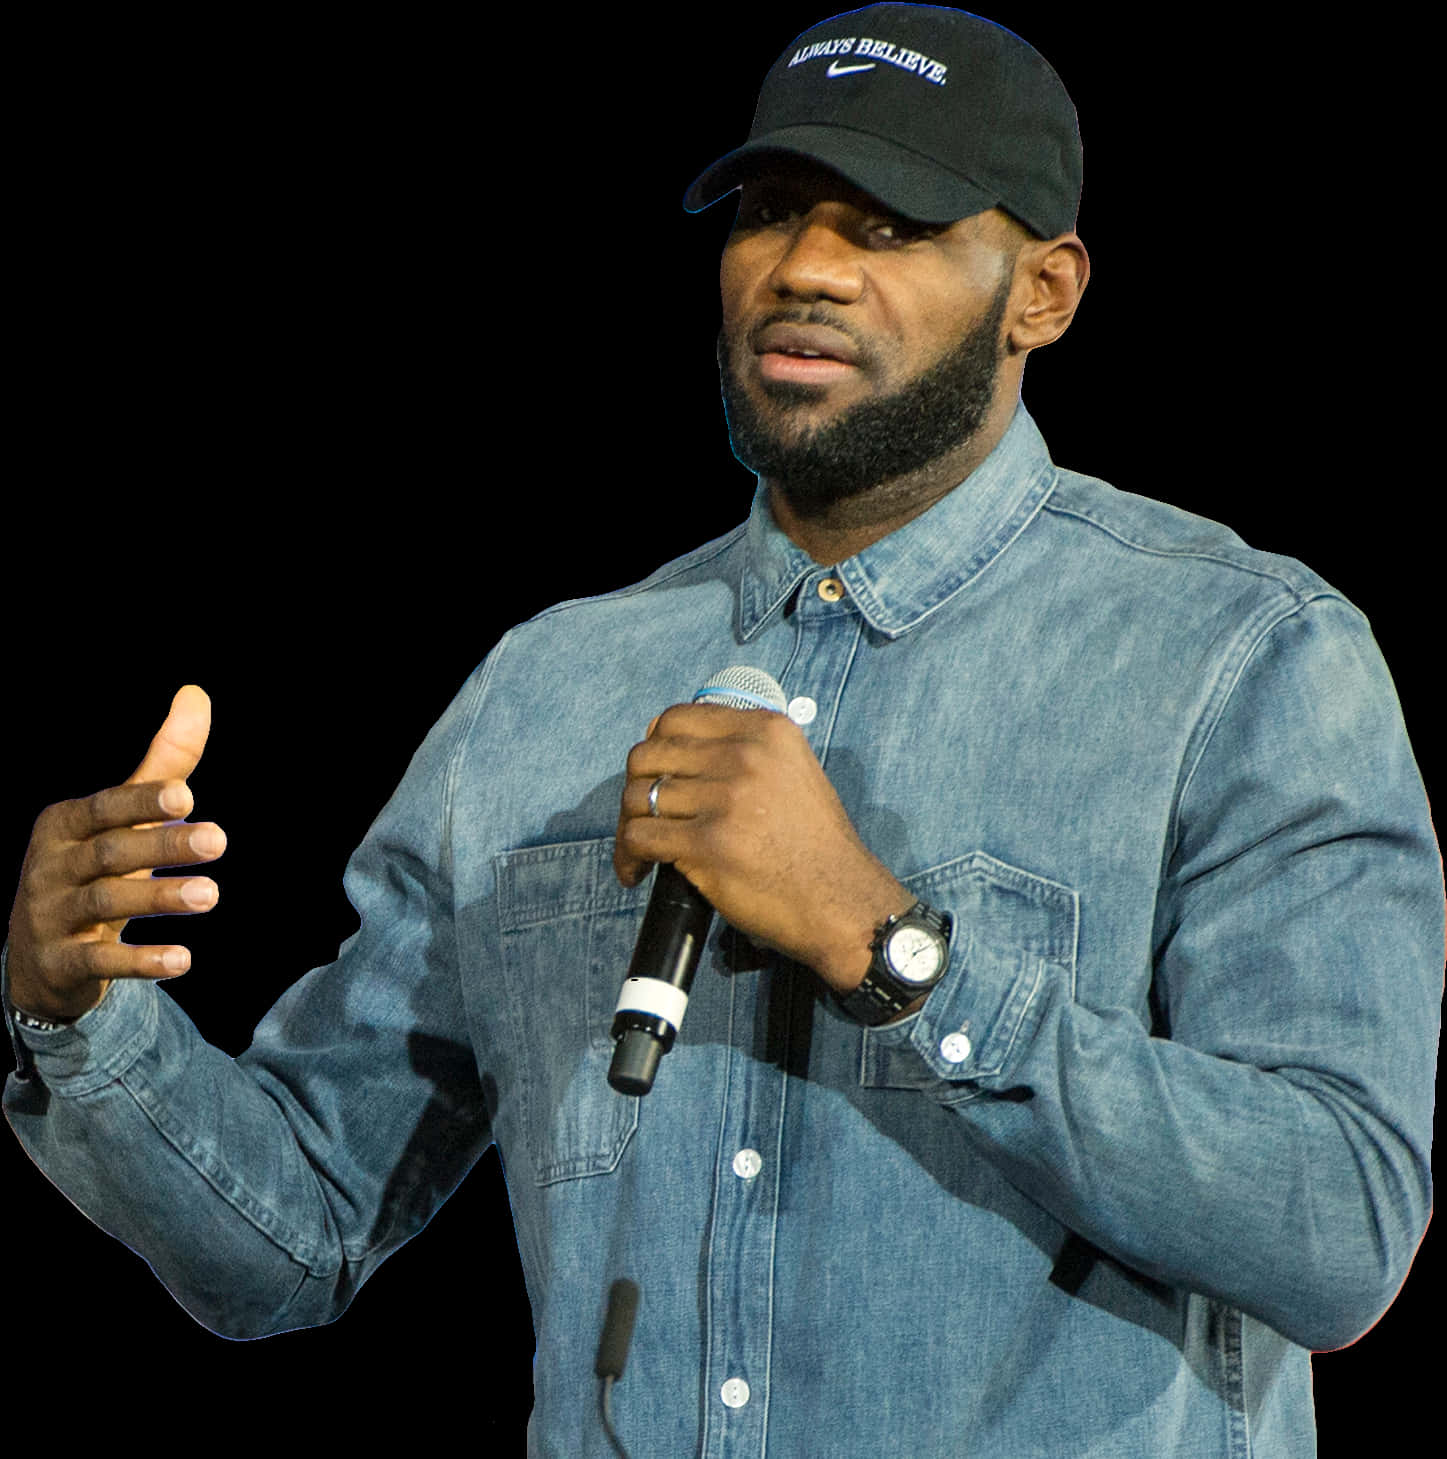 Le Bron James Speaking Event Denim Outfit PNG image